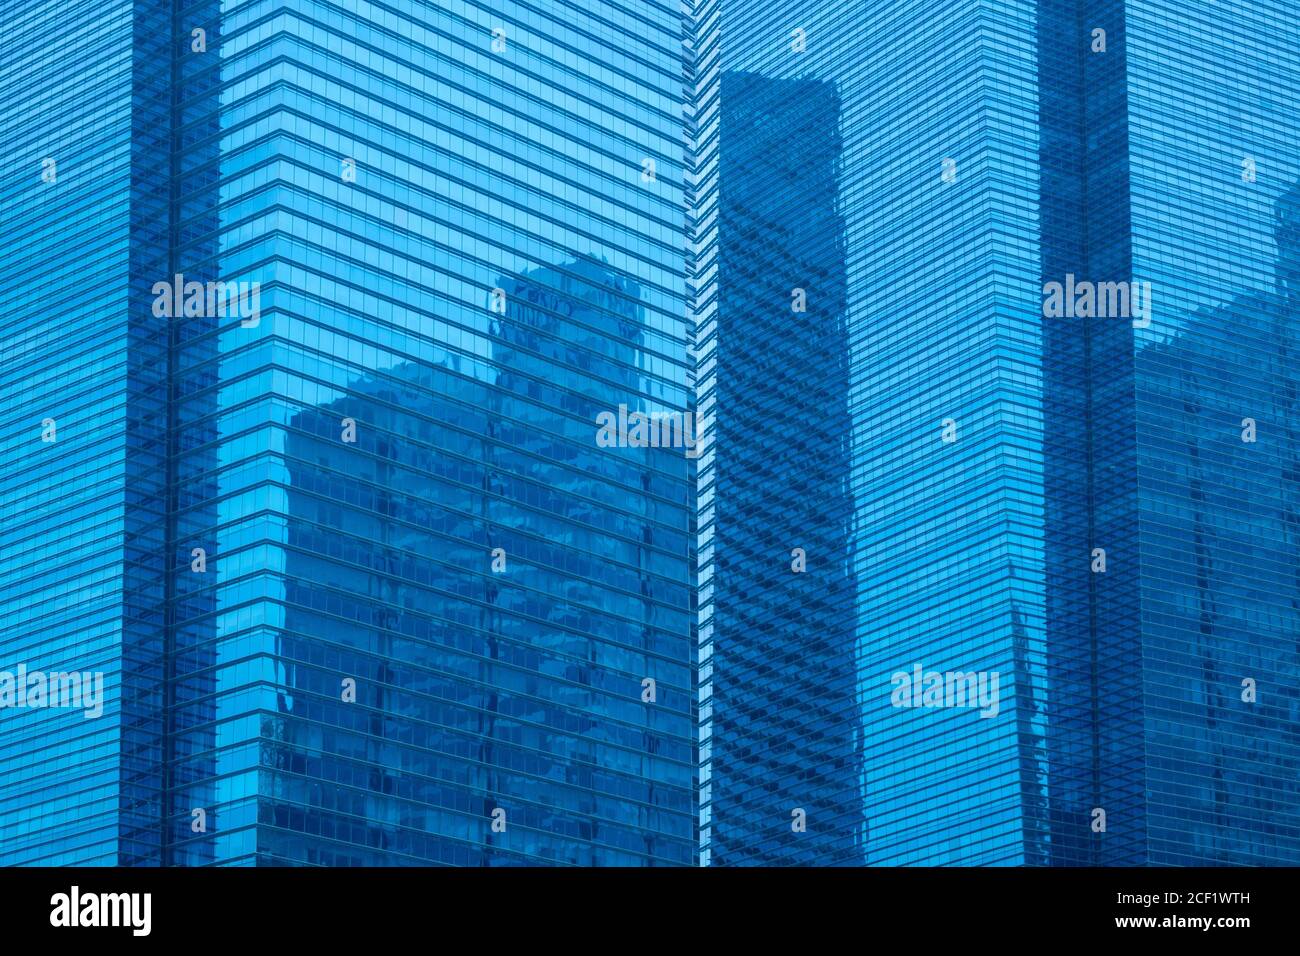 A multi-storey skyscraper with glass facades and reflection of another skyscraper. Stock Photo